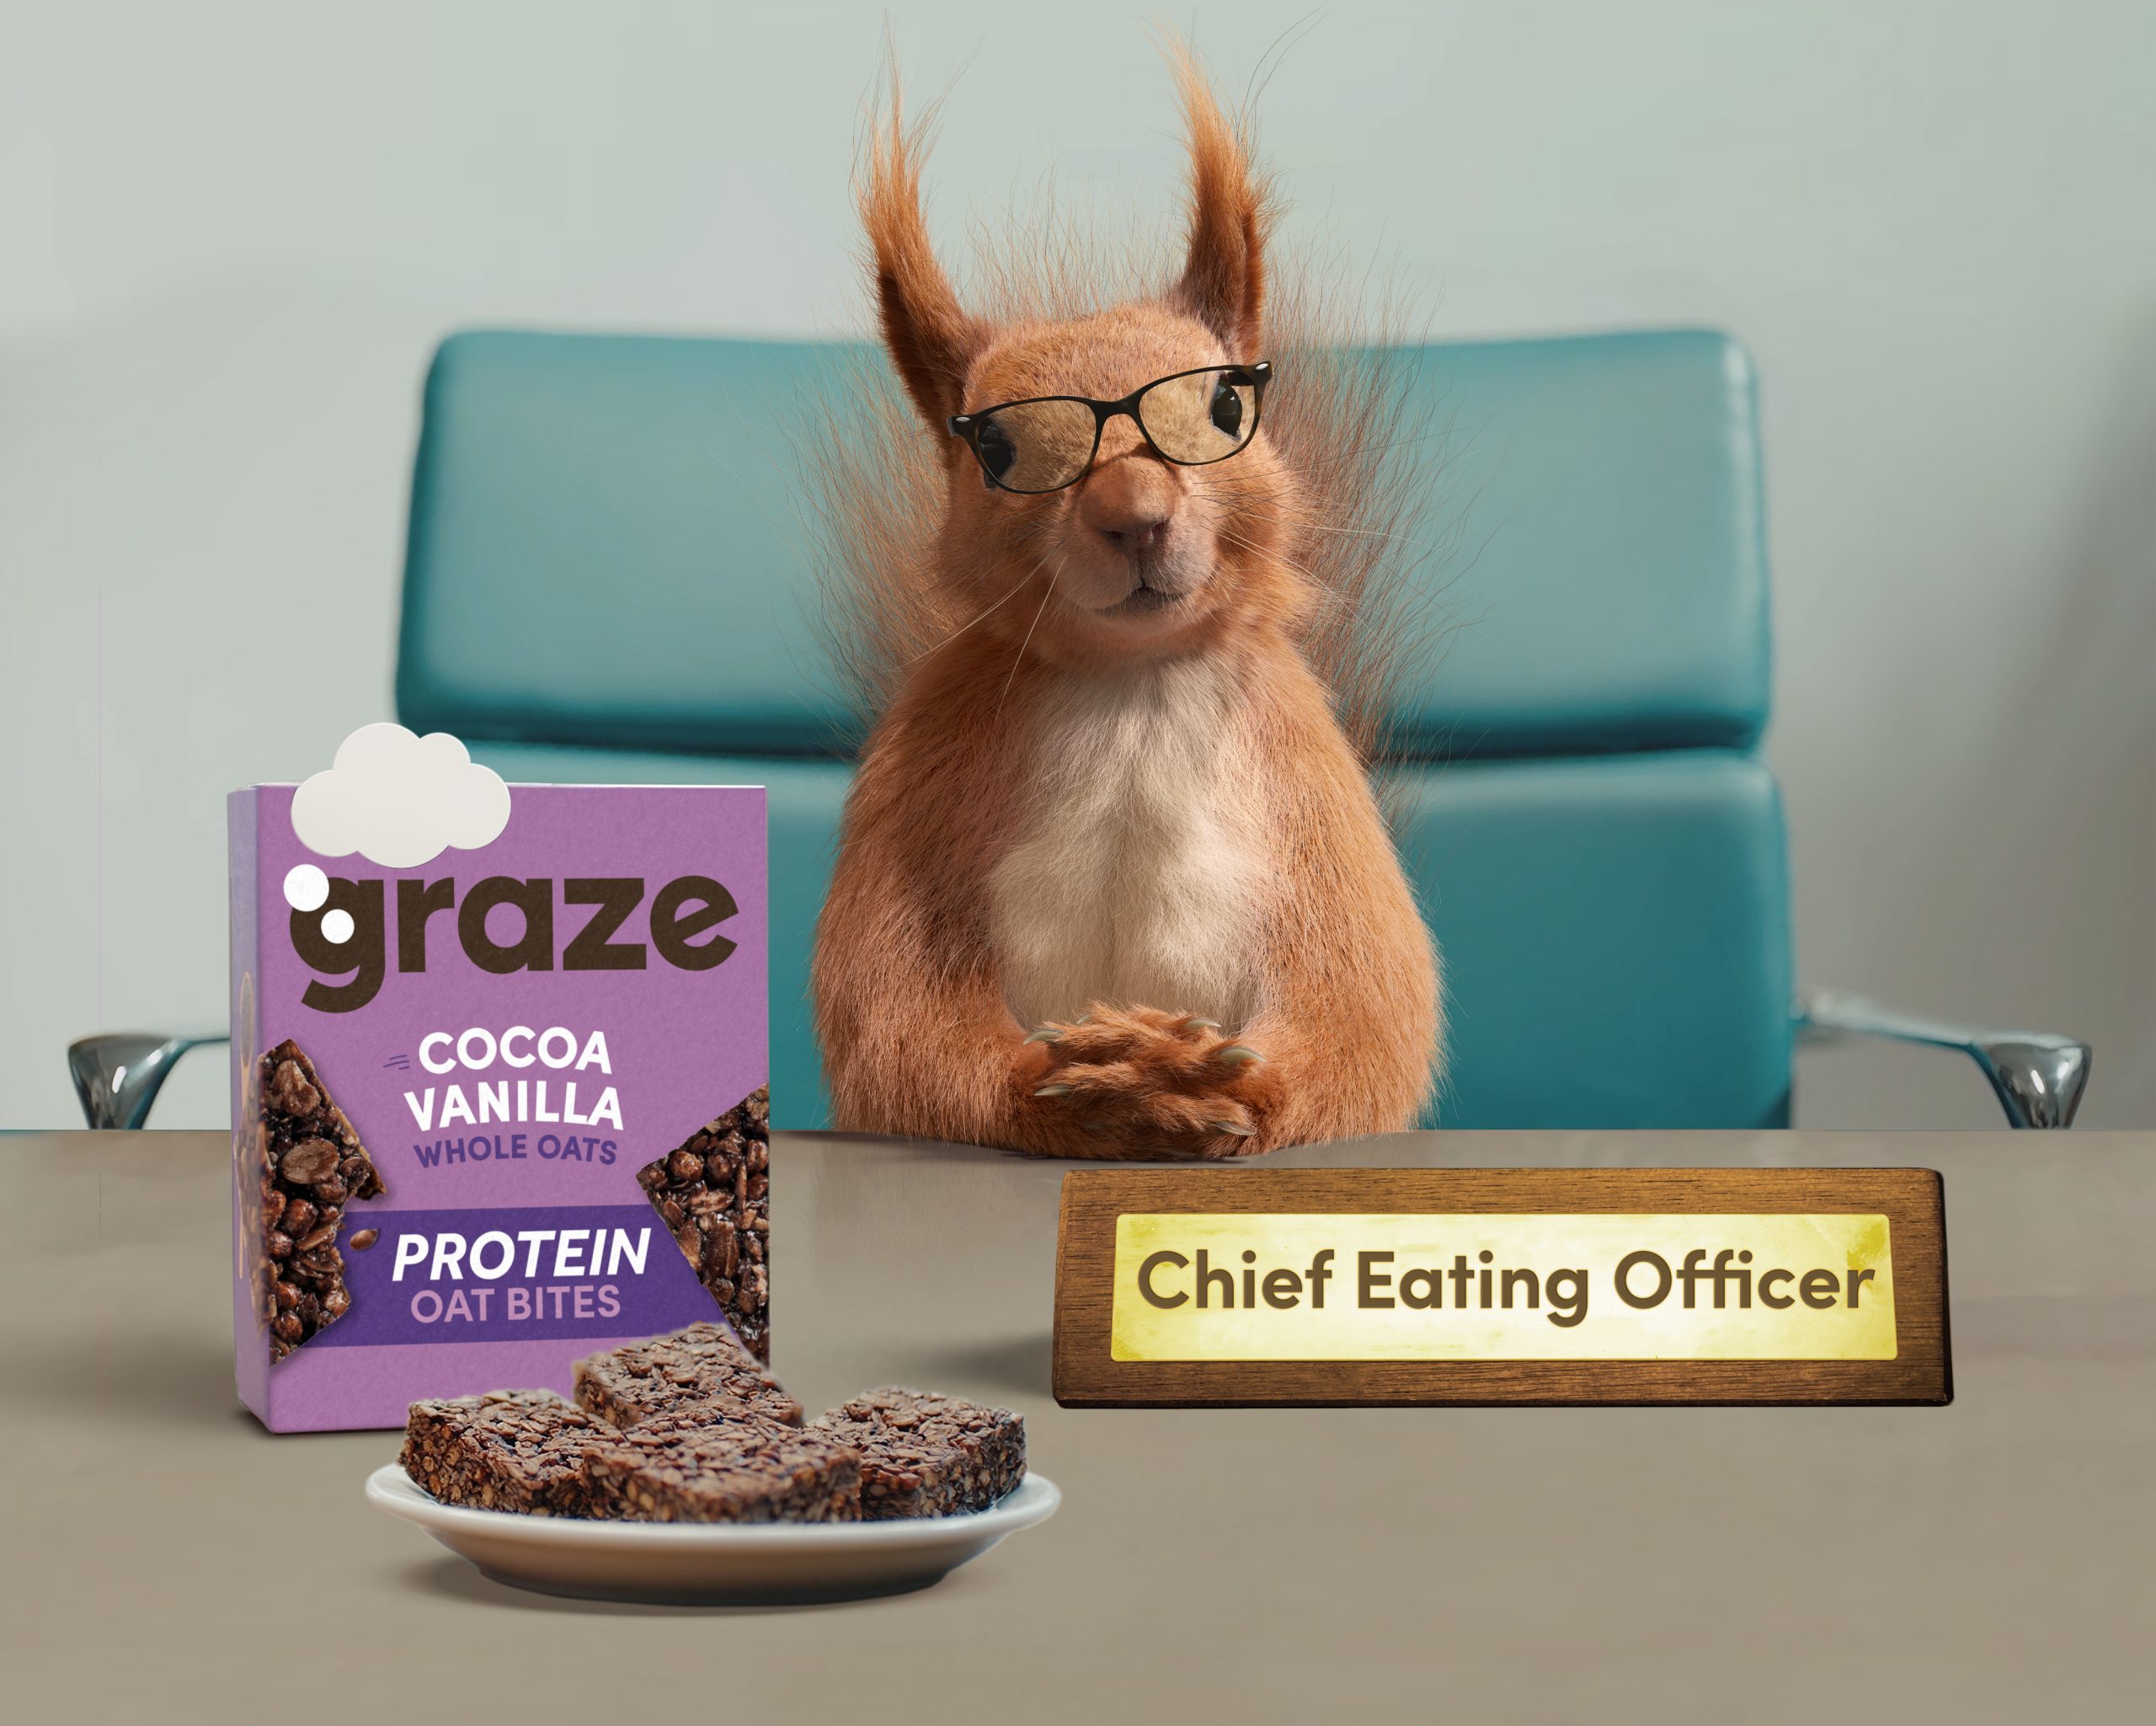 graze debuts first ever retail TV ad and new CEO (Chief Eating Officer)